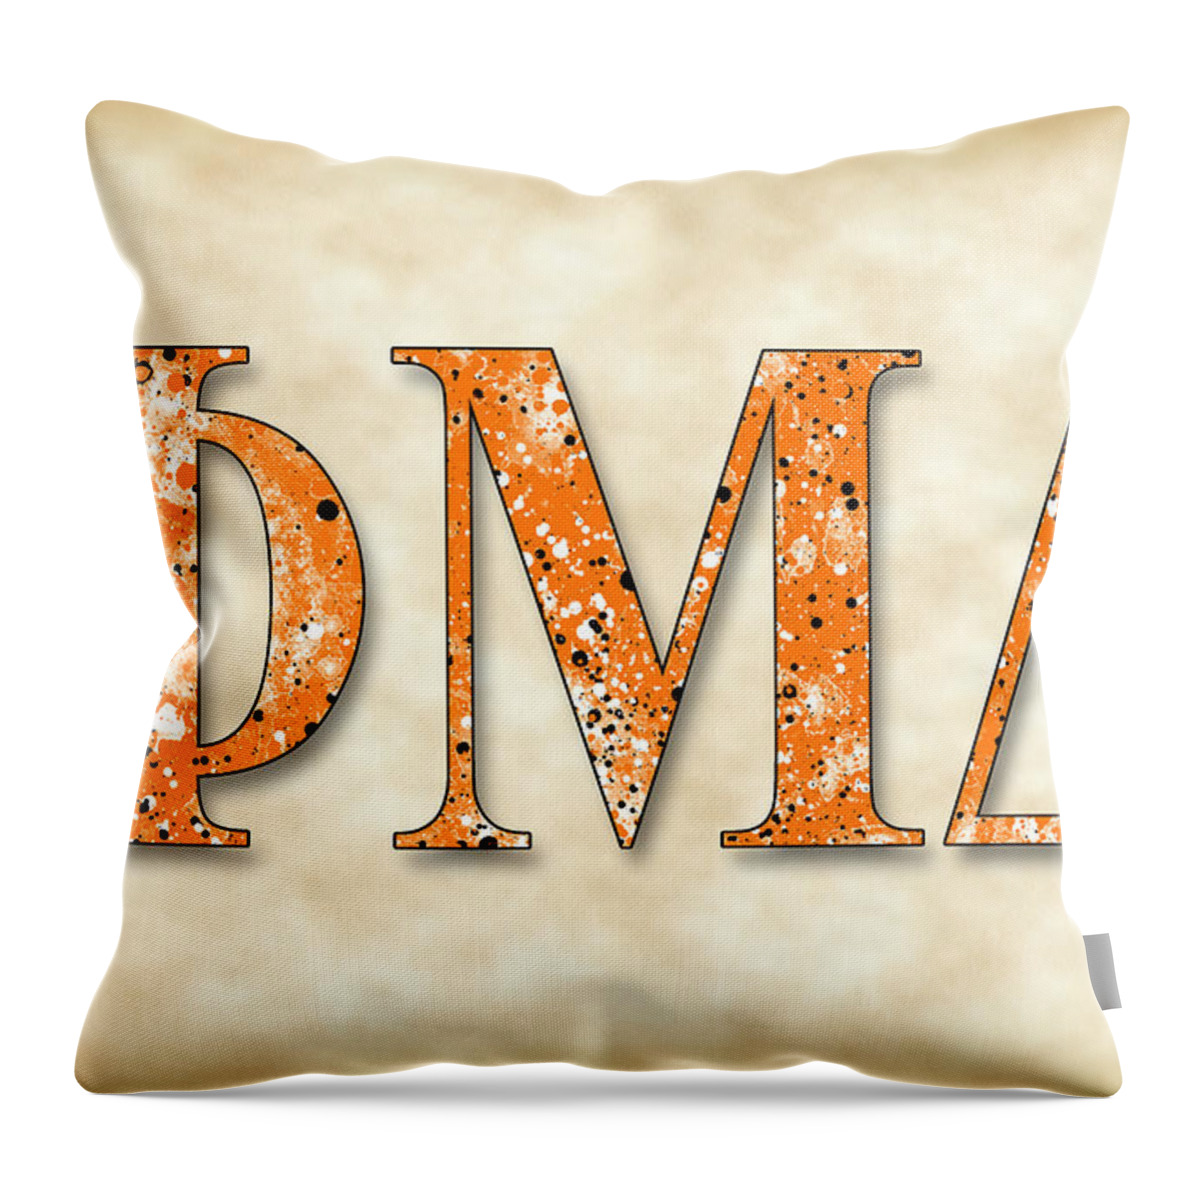 Phi Mu Delta Throw Pillow featuring the digital art Phi Mu Delta - Parchment by Stephen Younts